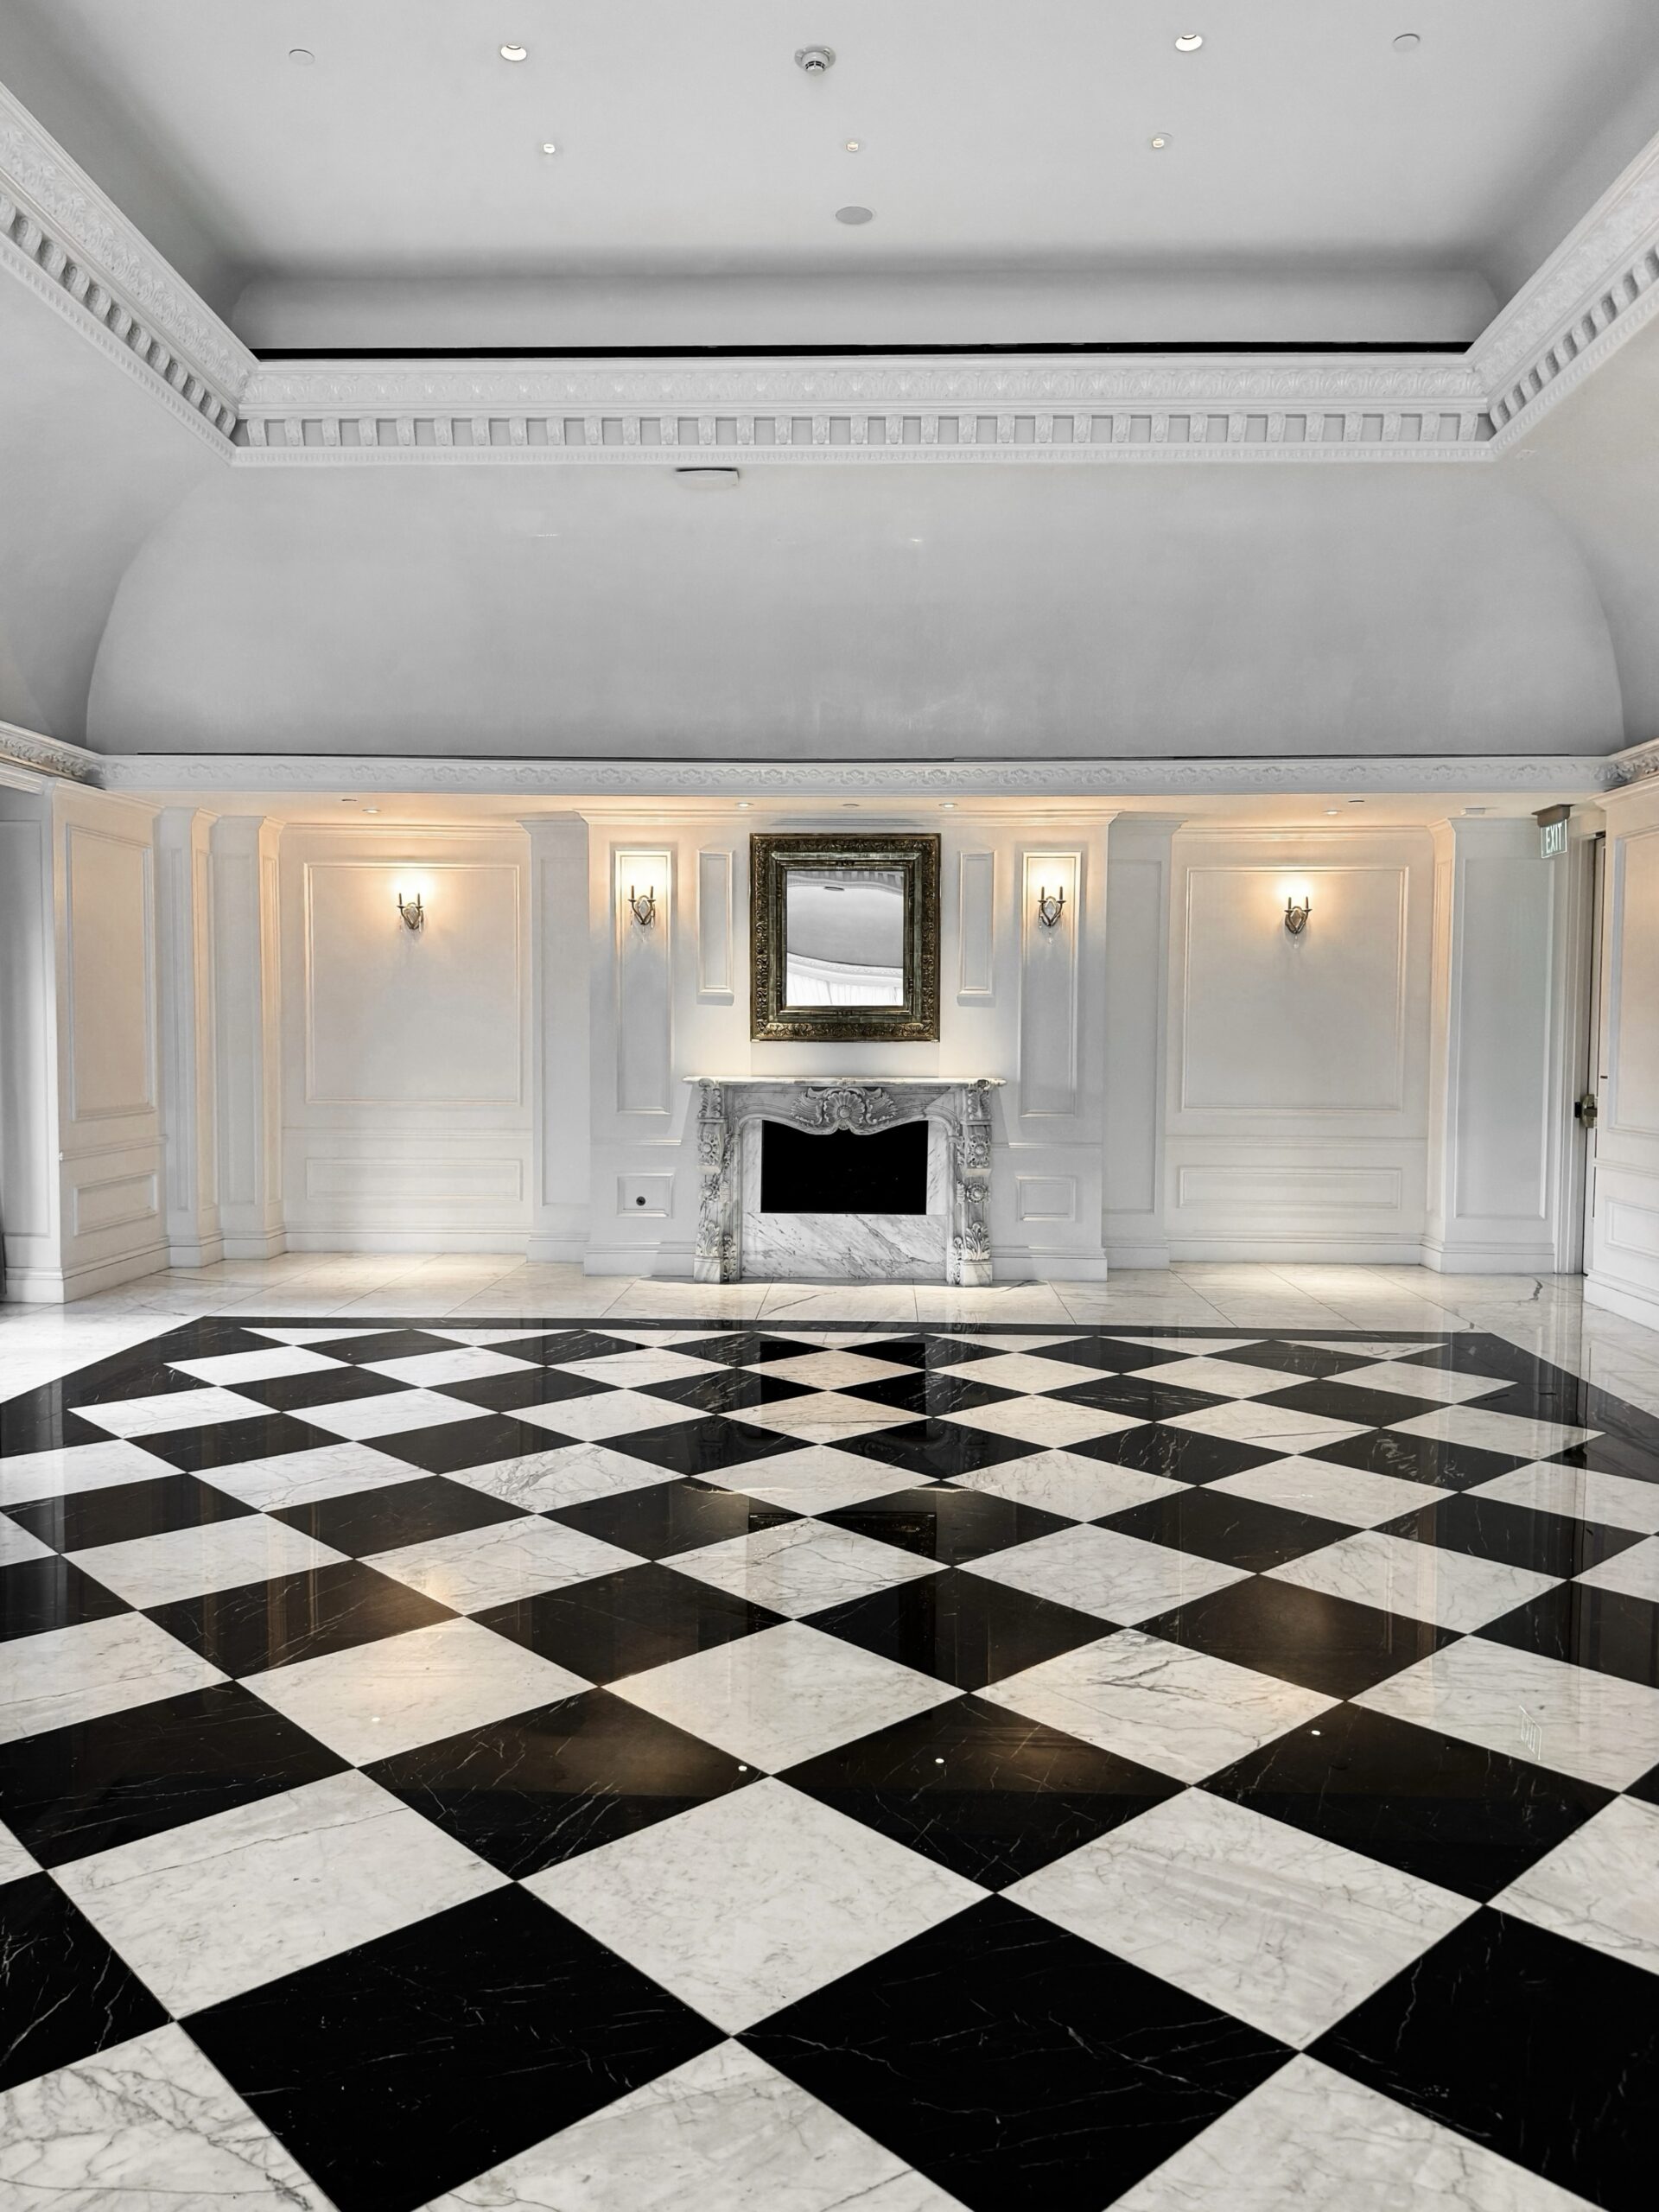 This image depicts an elegant and luxurious interior room with a high, vaulted ceiling and ornate moldings. The focal point is a grand, black-and-white checkered marble floor that leads to a decorative marble fireplace adorned with an ornate gold-framed mirror above it. Wall sconces provide soft, ambient lighting, highlighting the intricate details of the paneled walls. The overall aesthetic of the room is classical and sophisticated, reminiscent of a grand ballroom or a high-end hotel lobby. The polished marble floor reflects the lighting, adding to the opulent atmosphere.